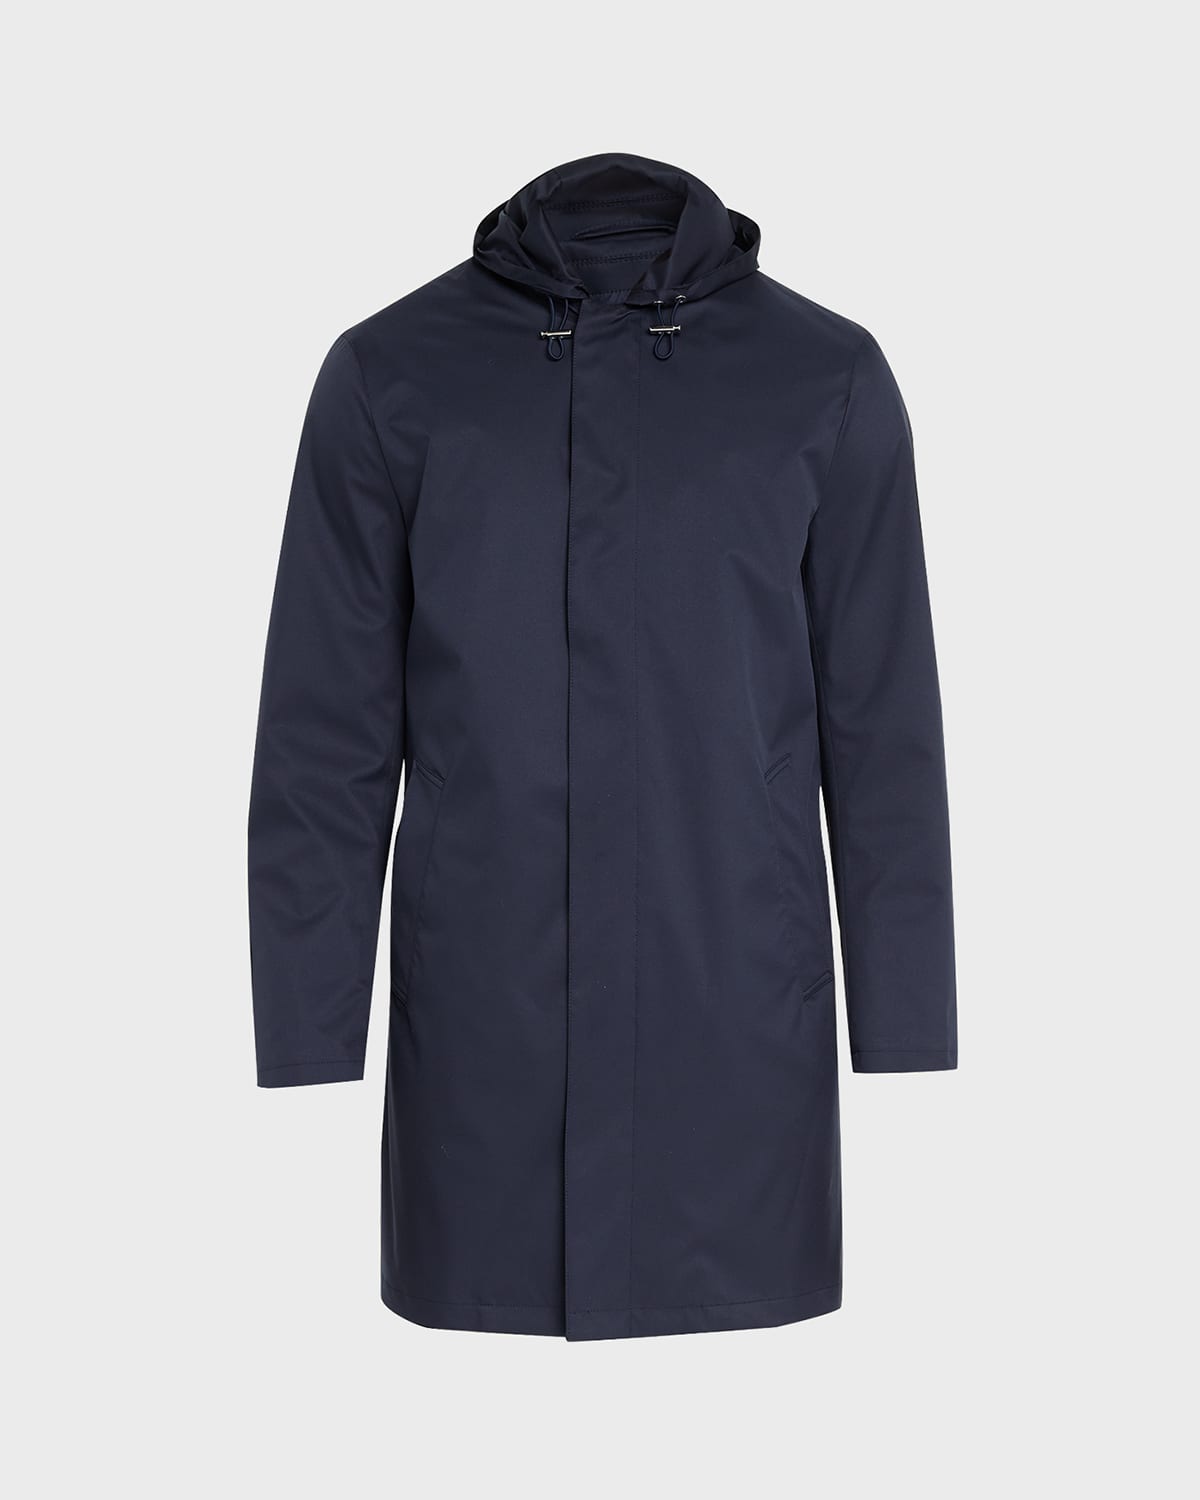 KITON MEN'S 4-LAYER RAINCOAT WITH REMOVABLE HOOD